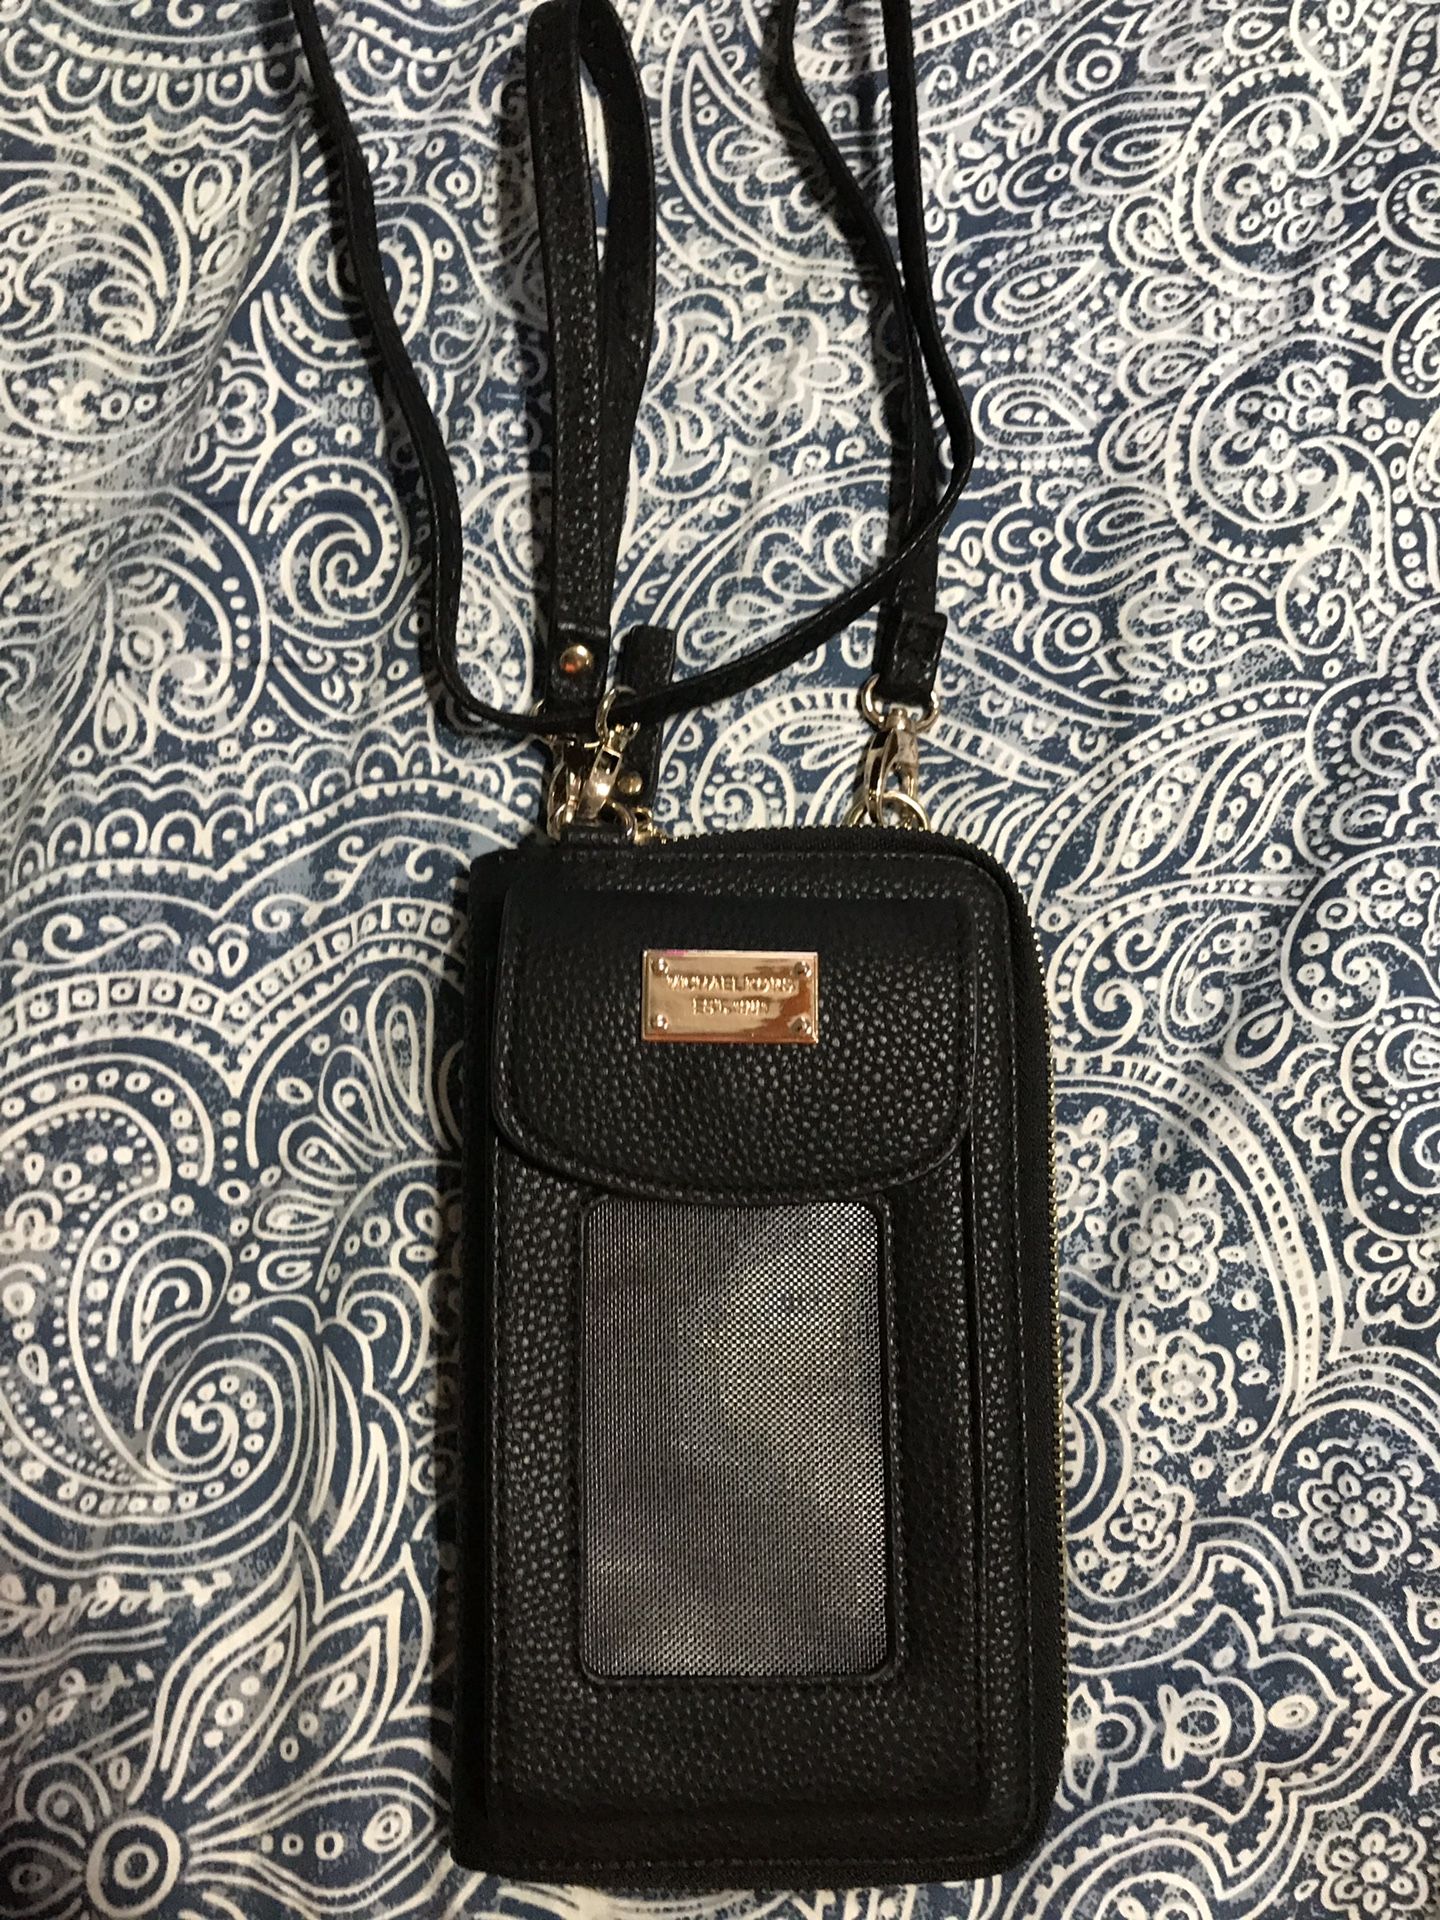 New phone case and wallet/crossbody